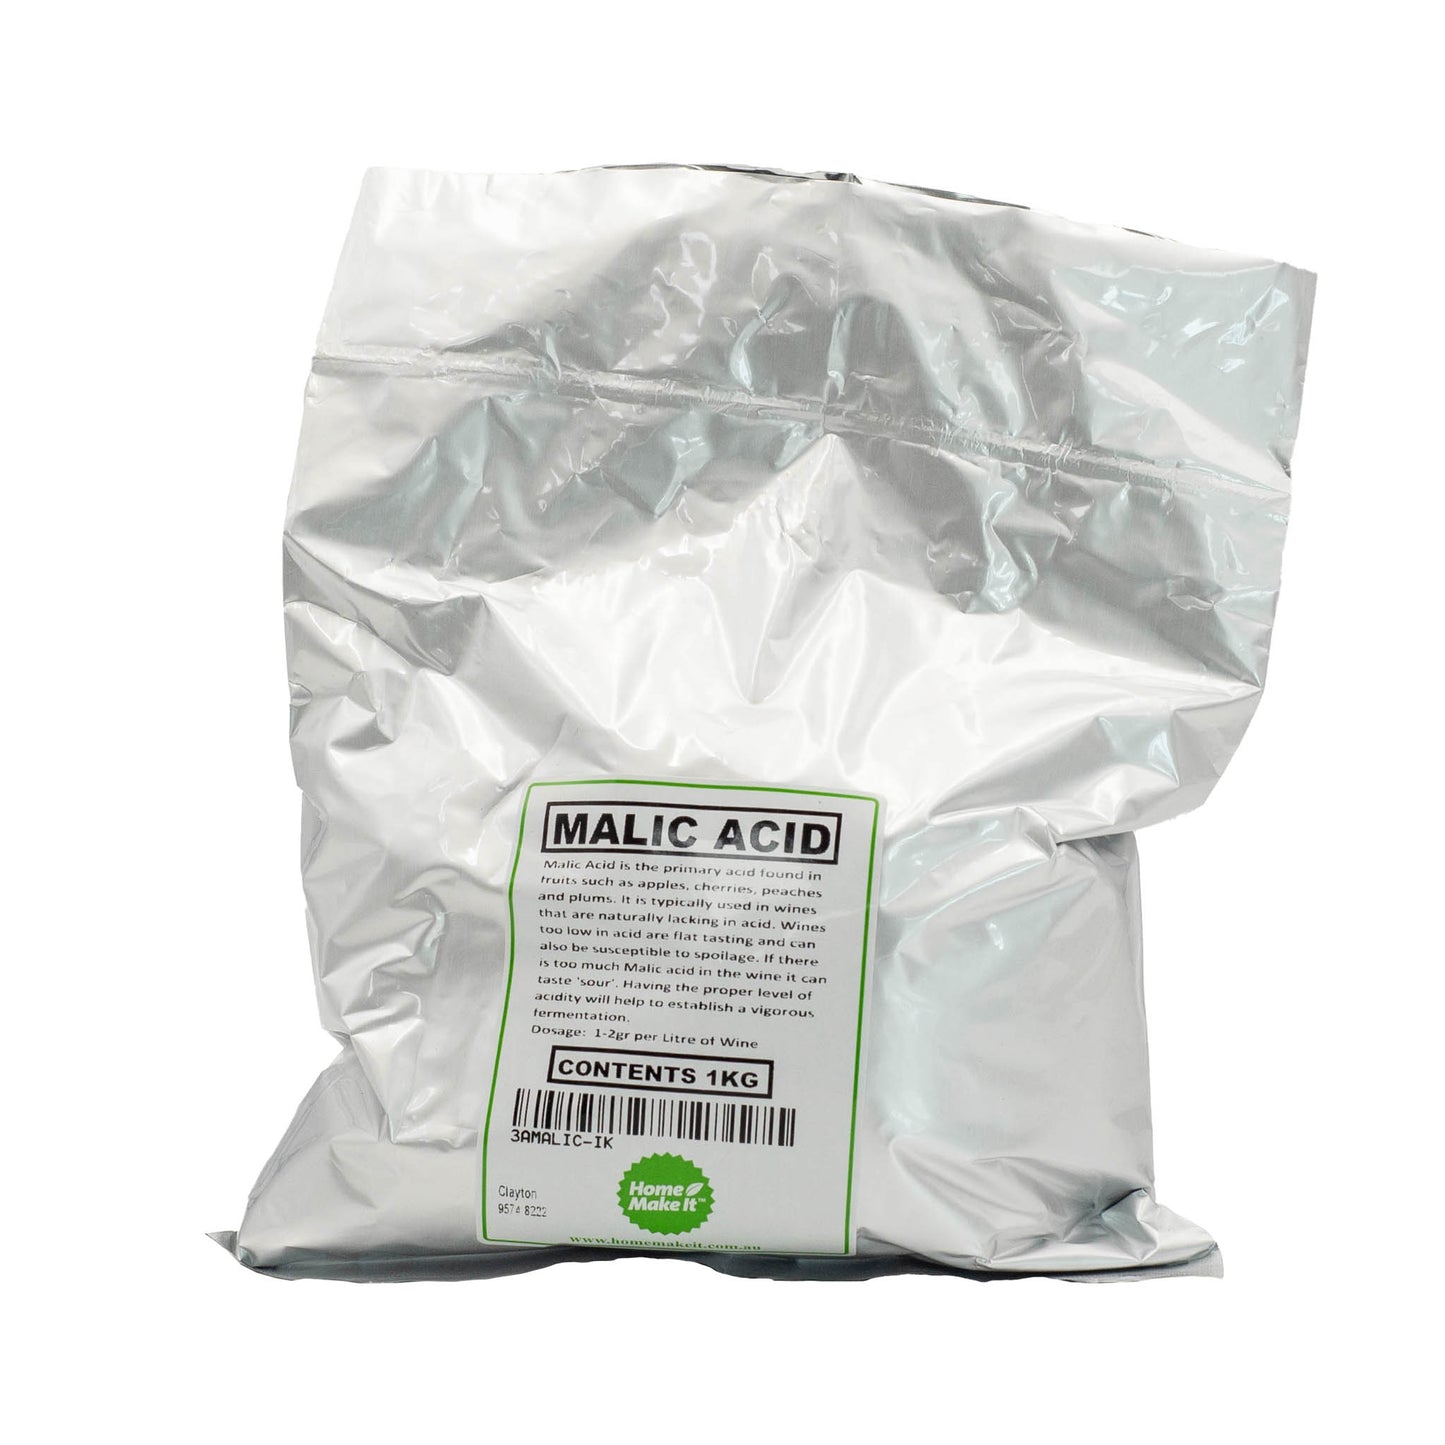 1kg bag of malic acid. Used in wines that are lacking in acid. 